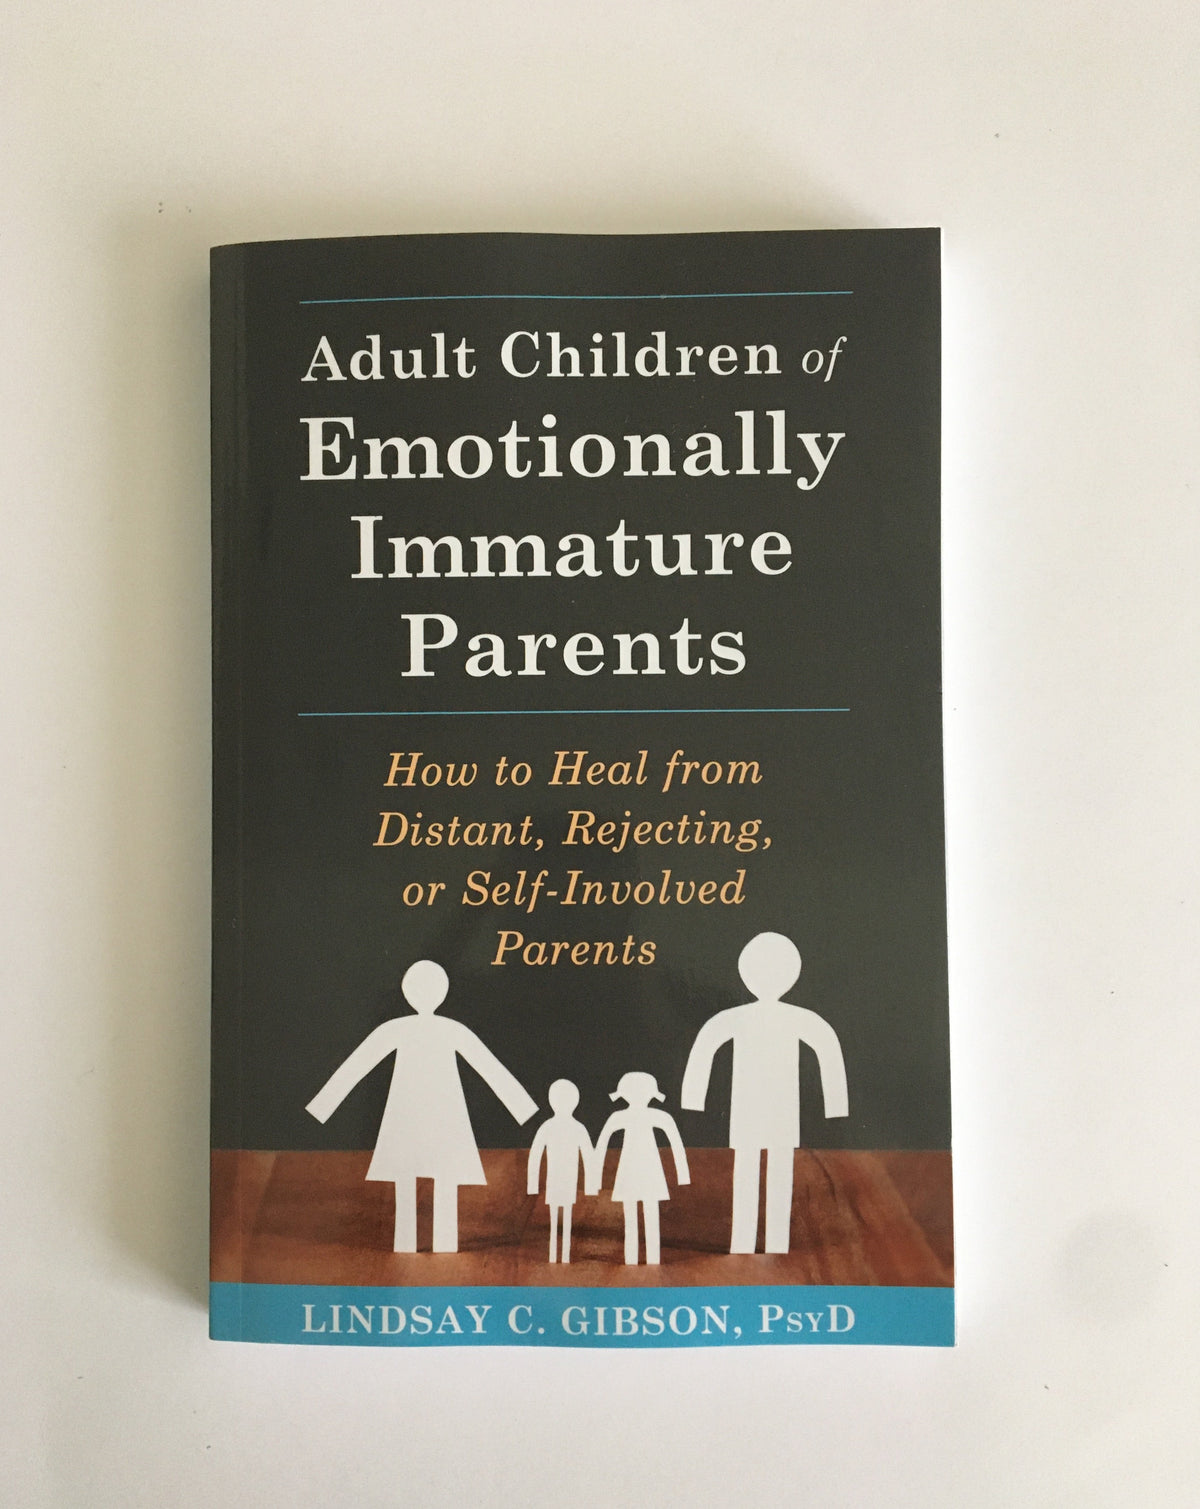 Adult Children of Emotionally Immature Parents: How to Heal from Distant, Rejecting, or Self-Involved Parents by Lindsay G. Gibson